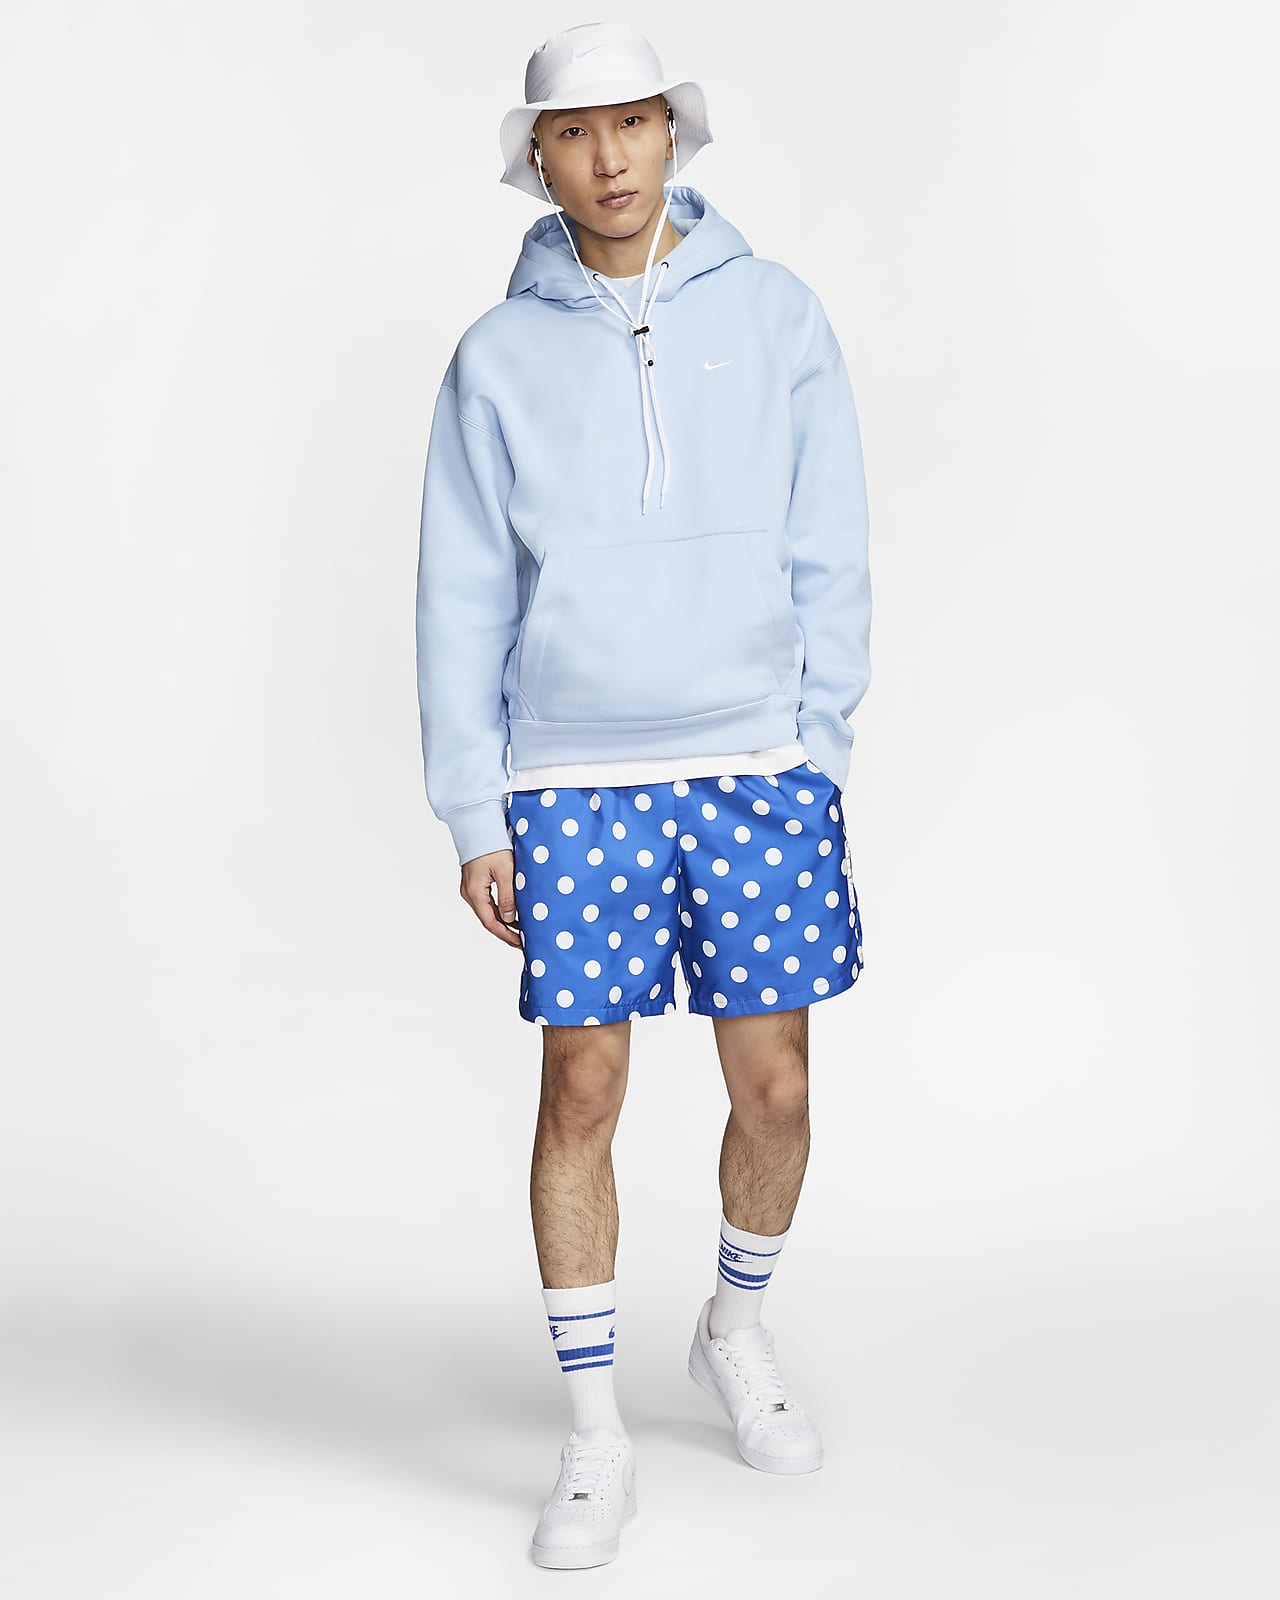 nike woven shorts pacific blue